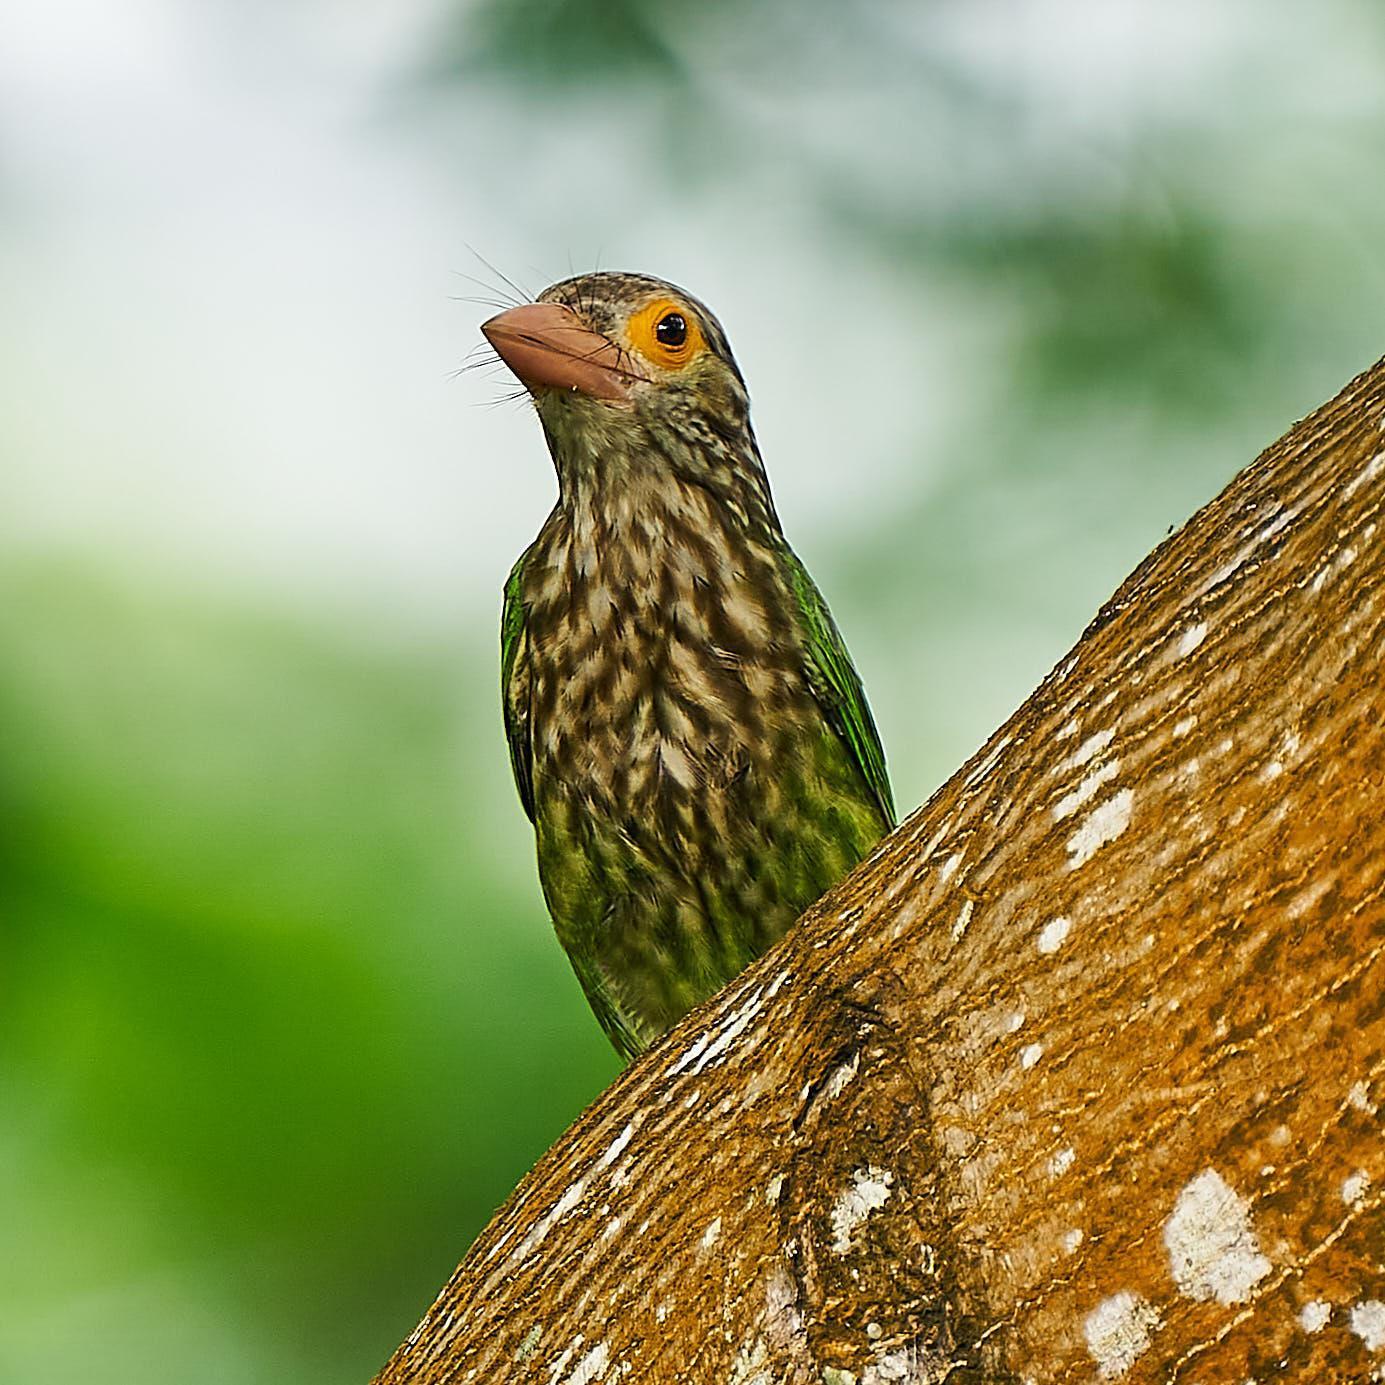 Lineated Barbet Photo by Steven Cheong